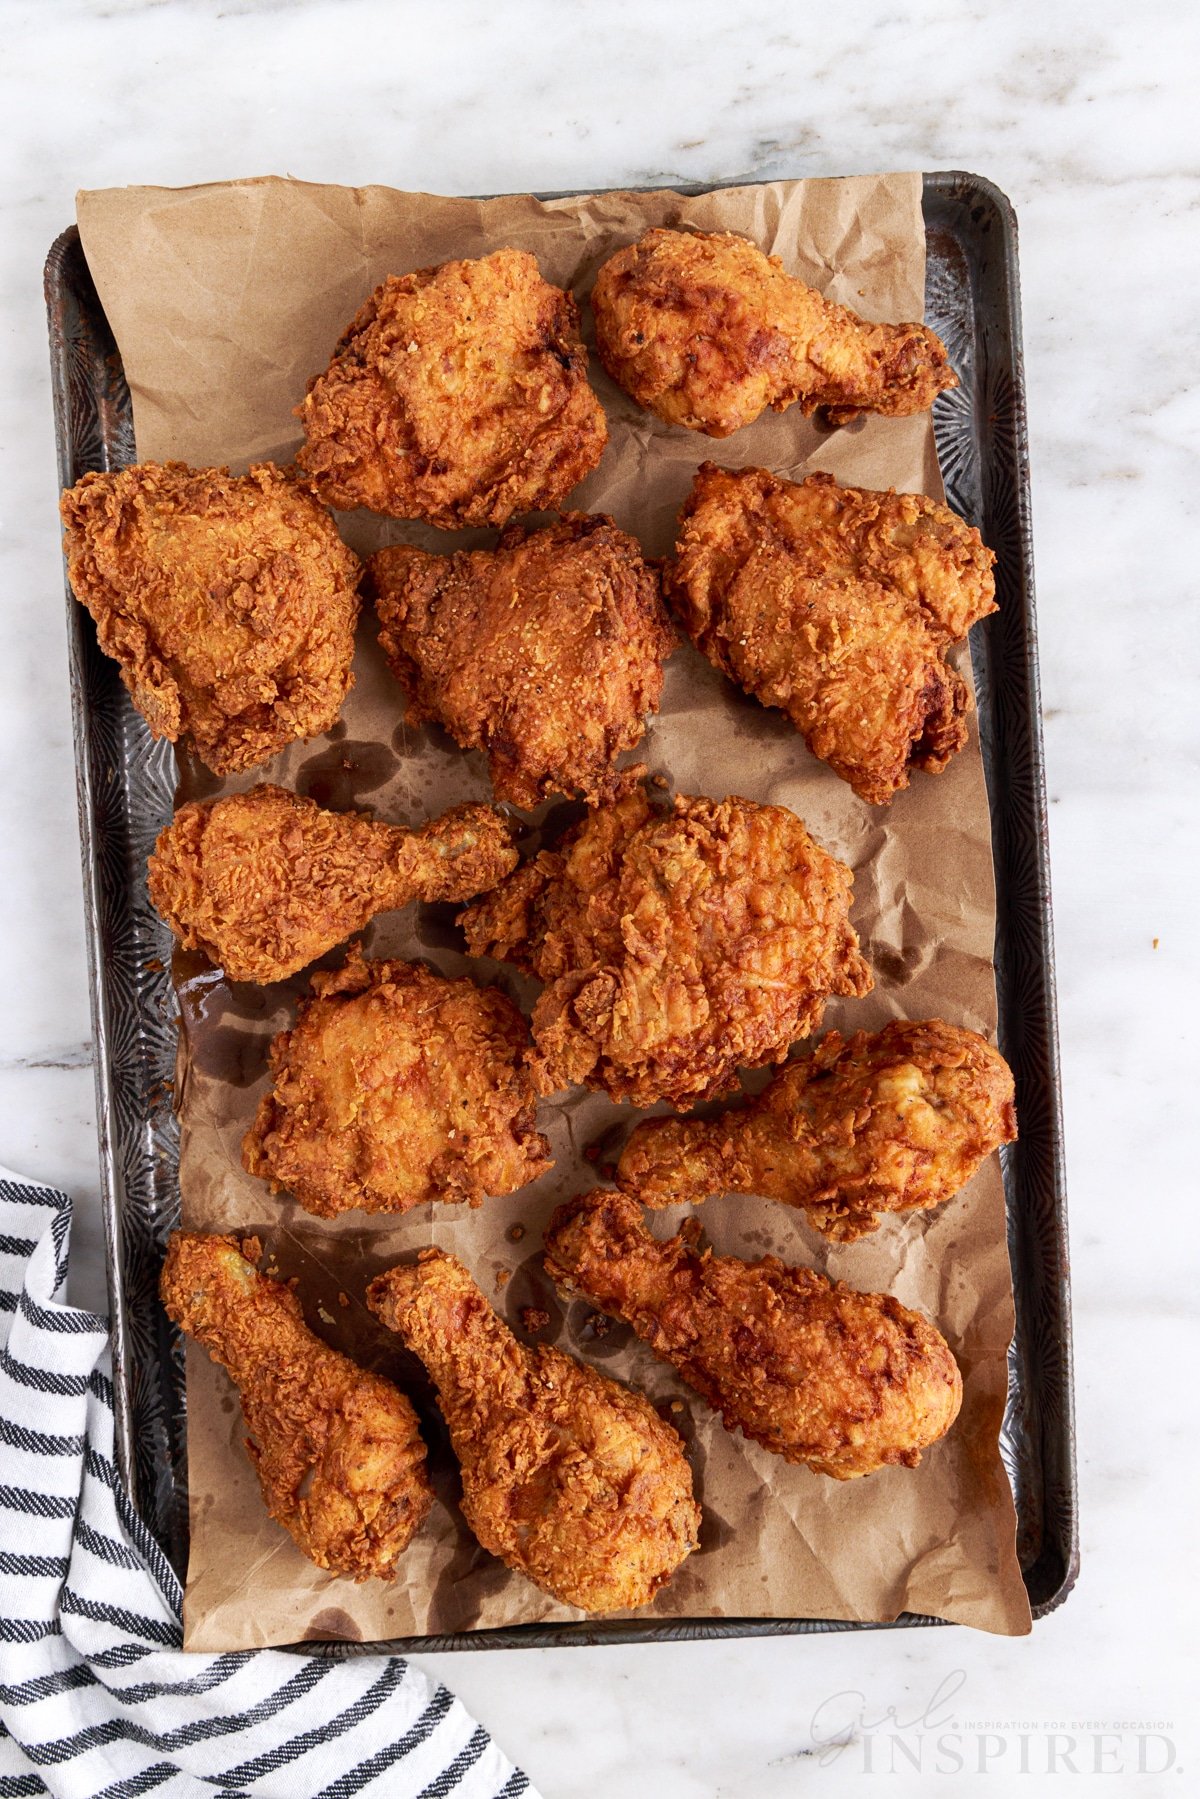 Fried chicken on a metal baking tray on a white marble countertop, navy striped linen.